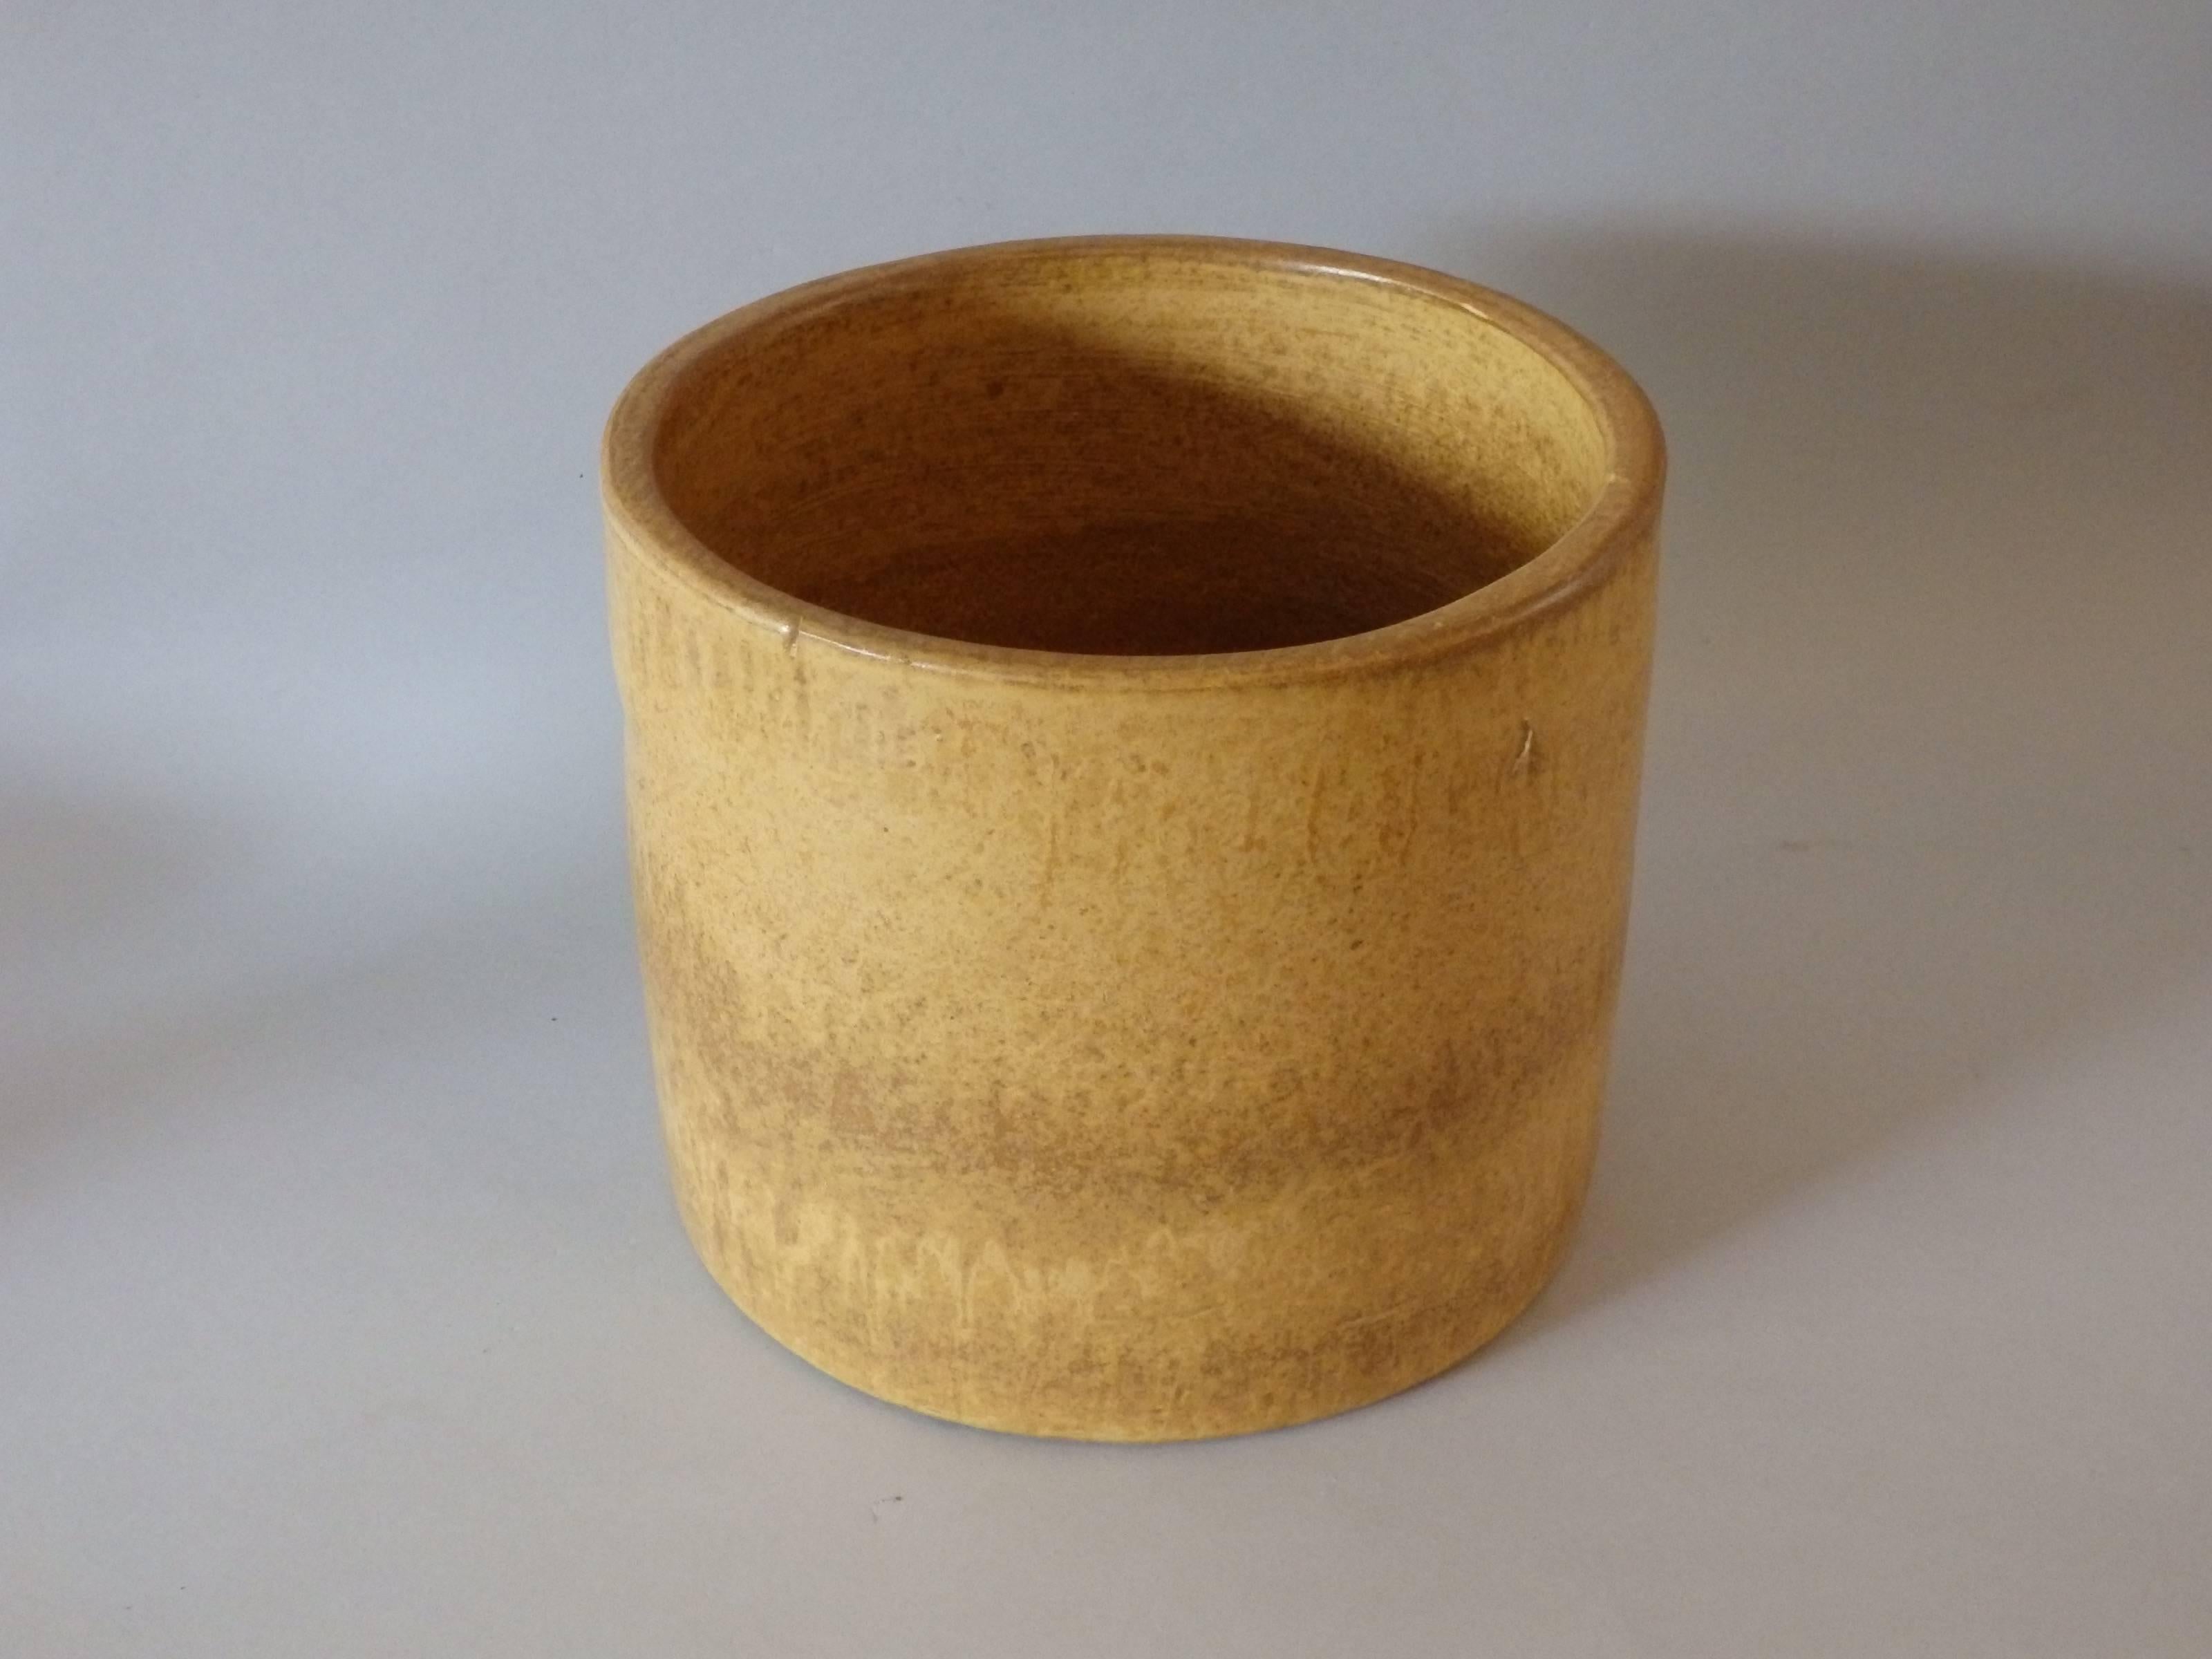 Clean mustard marigold glaze cylinder form planter pot. In the style of architectural pottery but un signed.